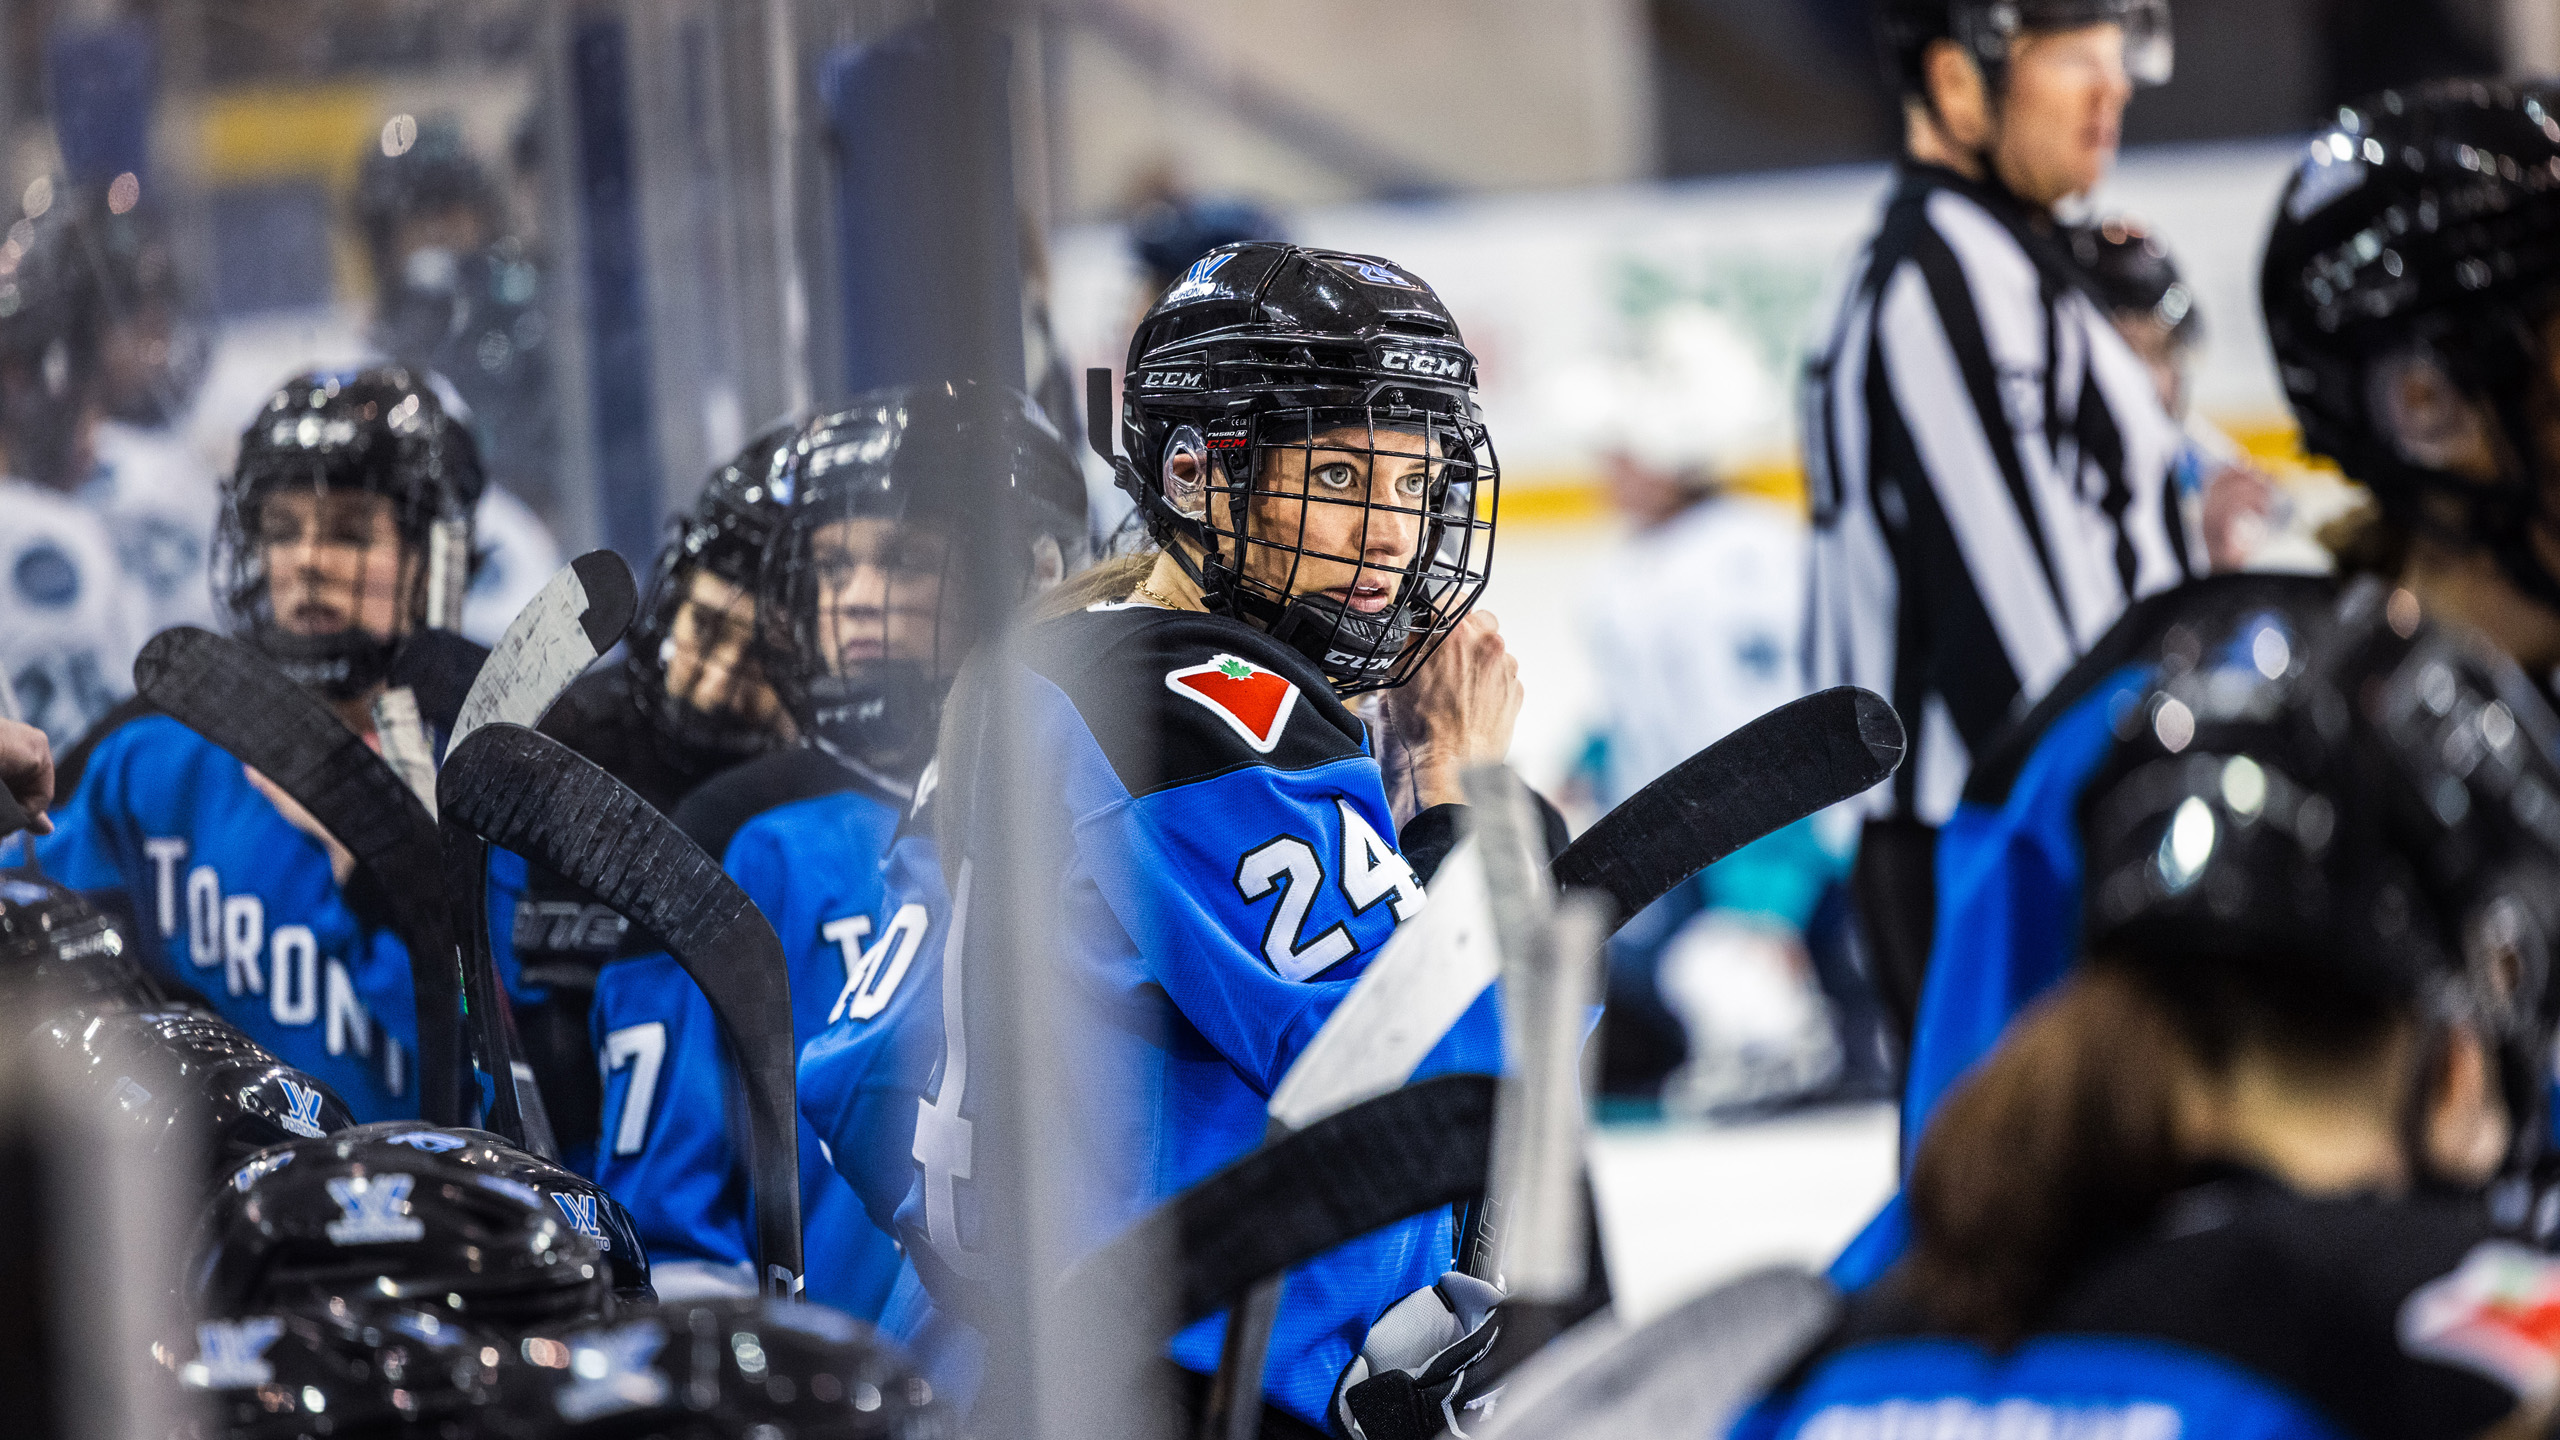 PWHL Toronto player Natalie Spooner stares at the ice from the bench